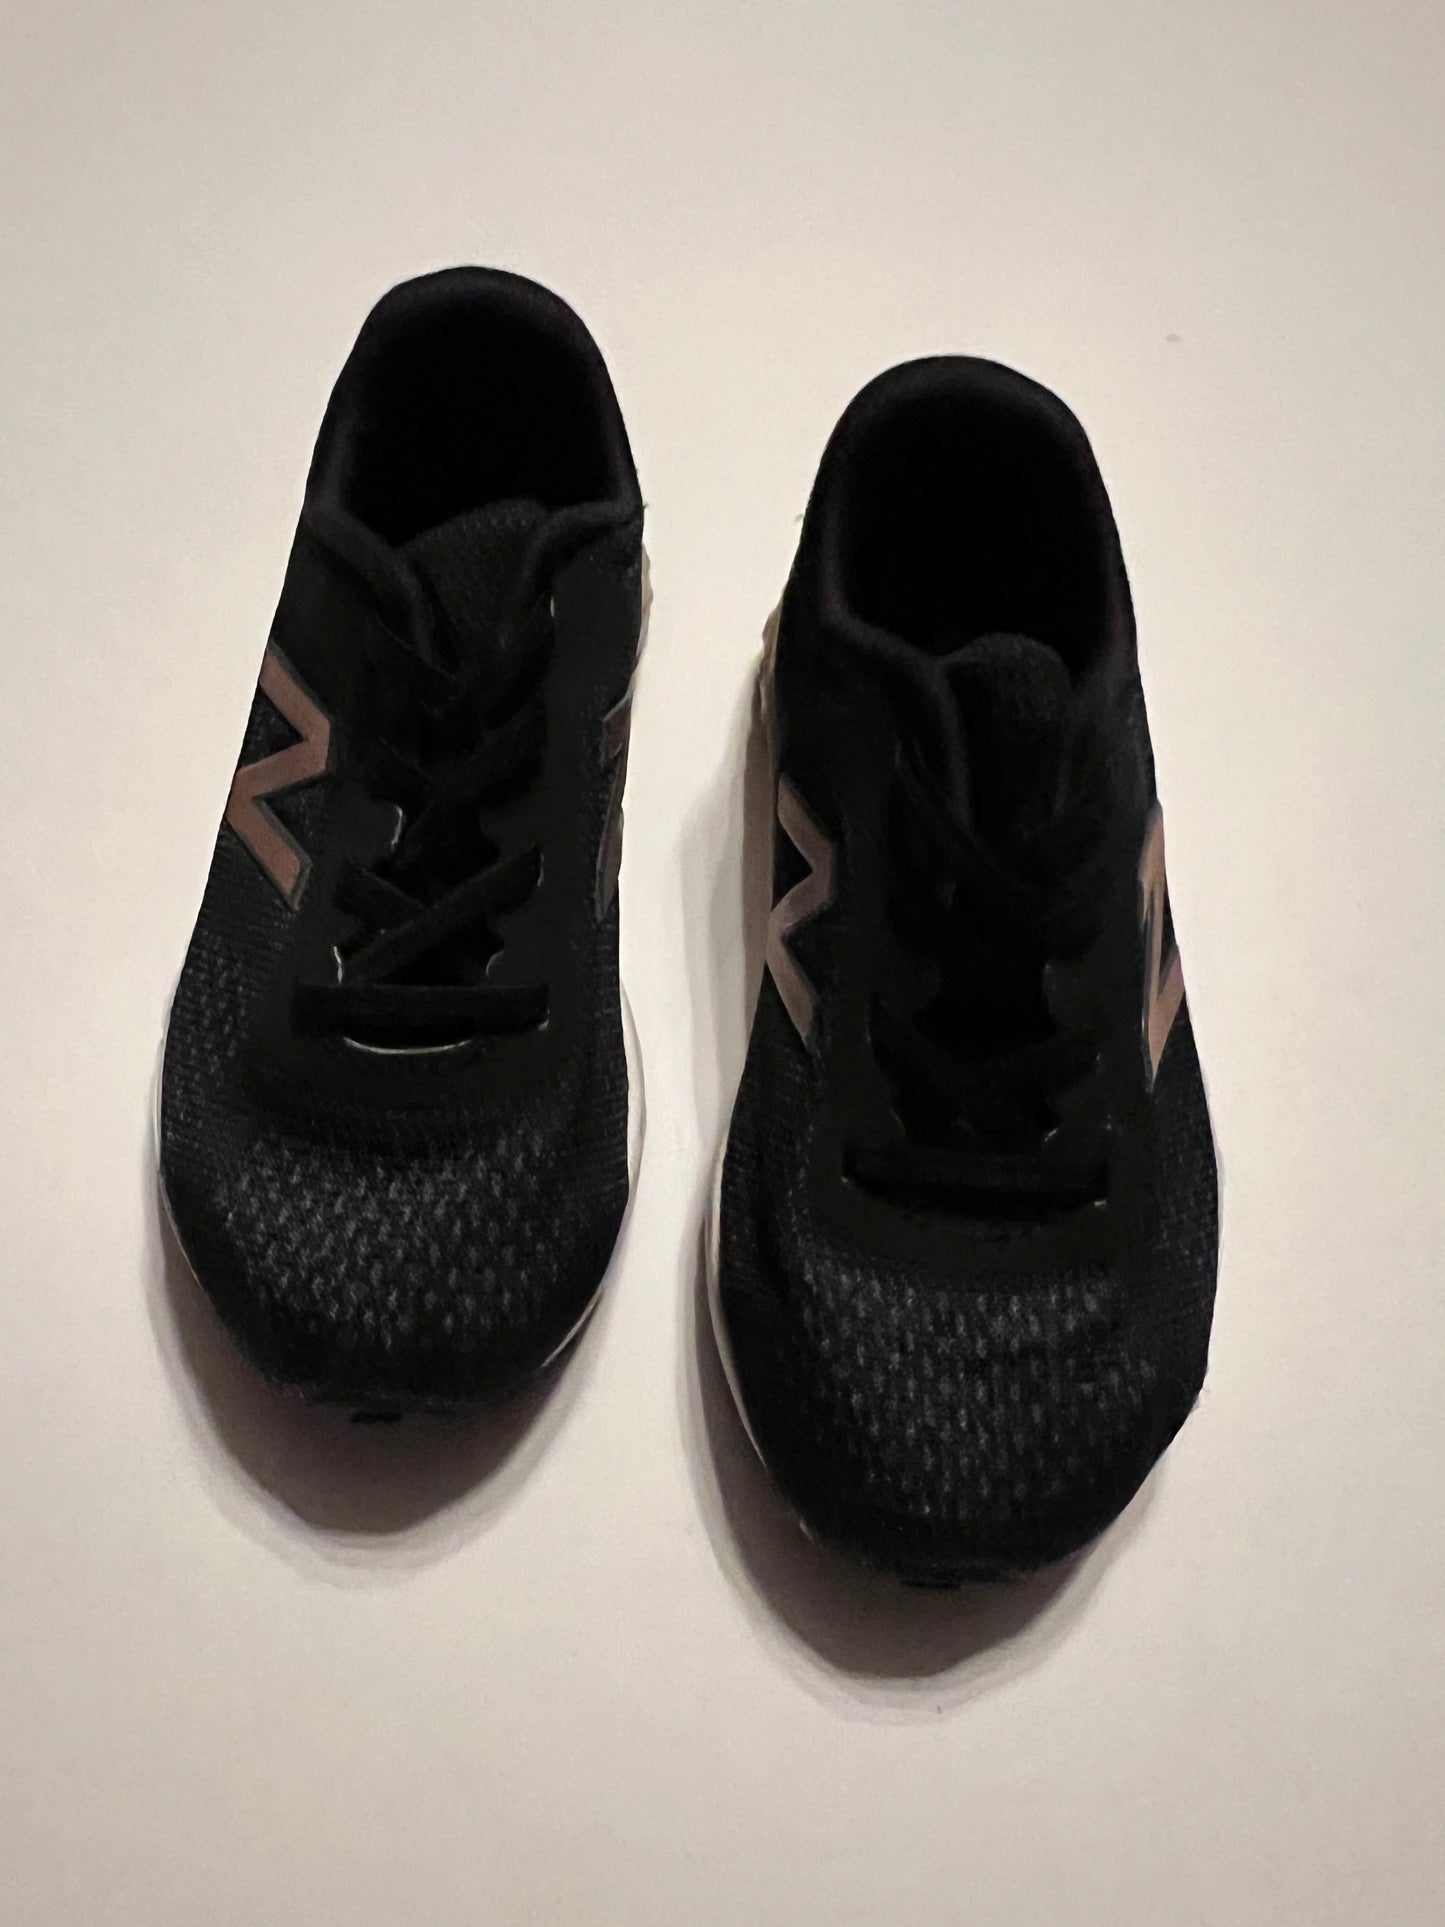 Girls Shoe 7.5 Black New Balance with Rose Gold Accents